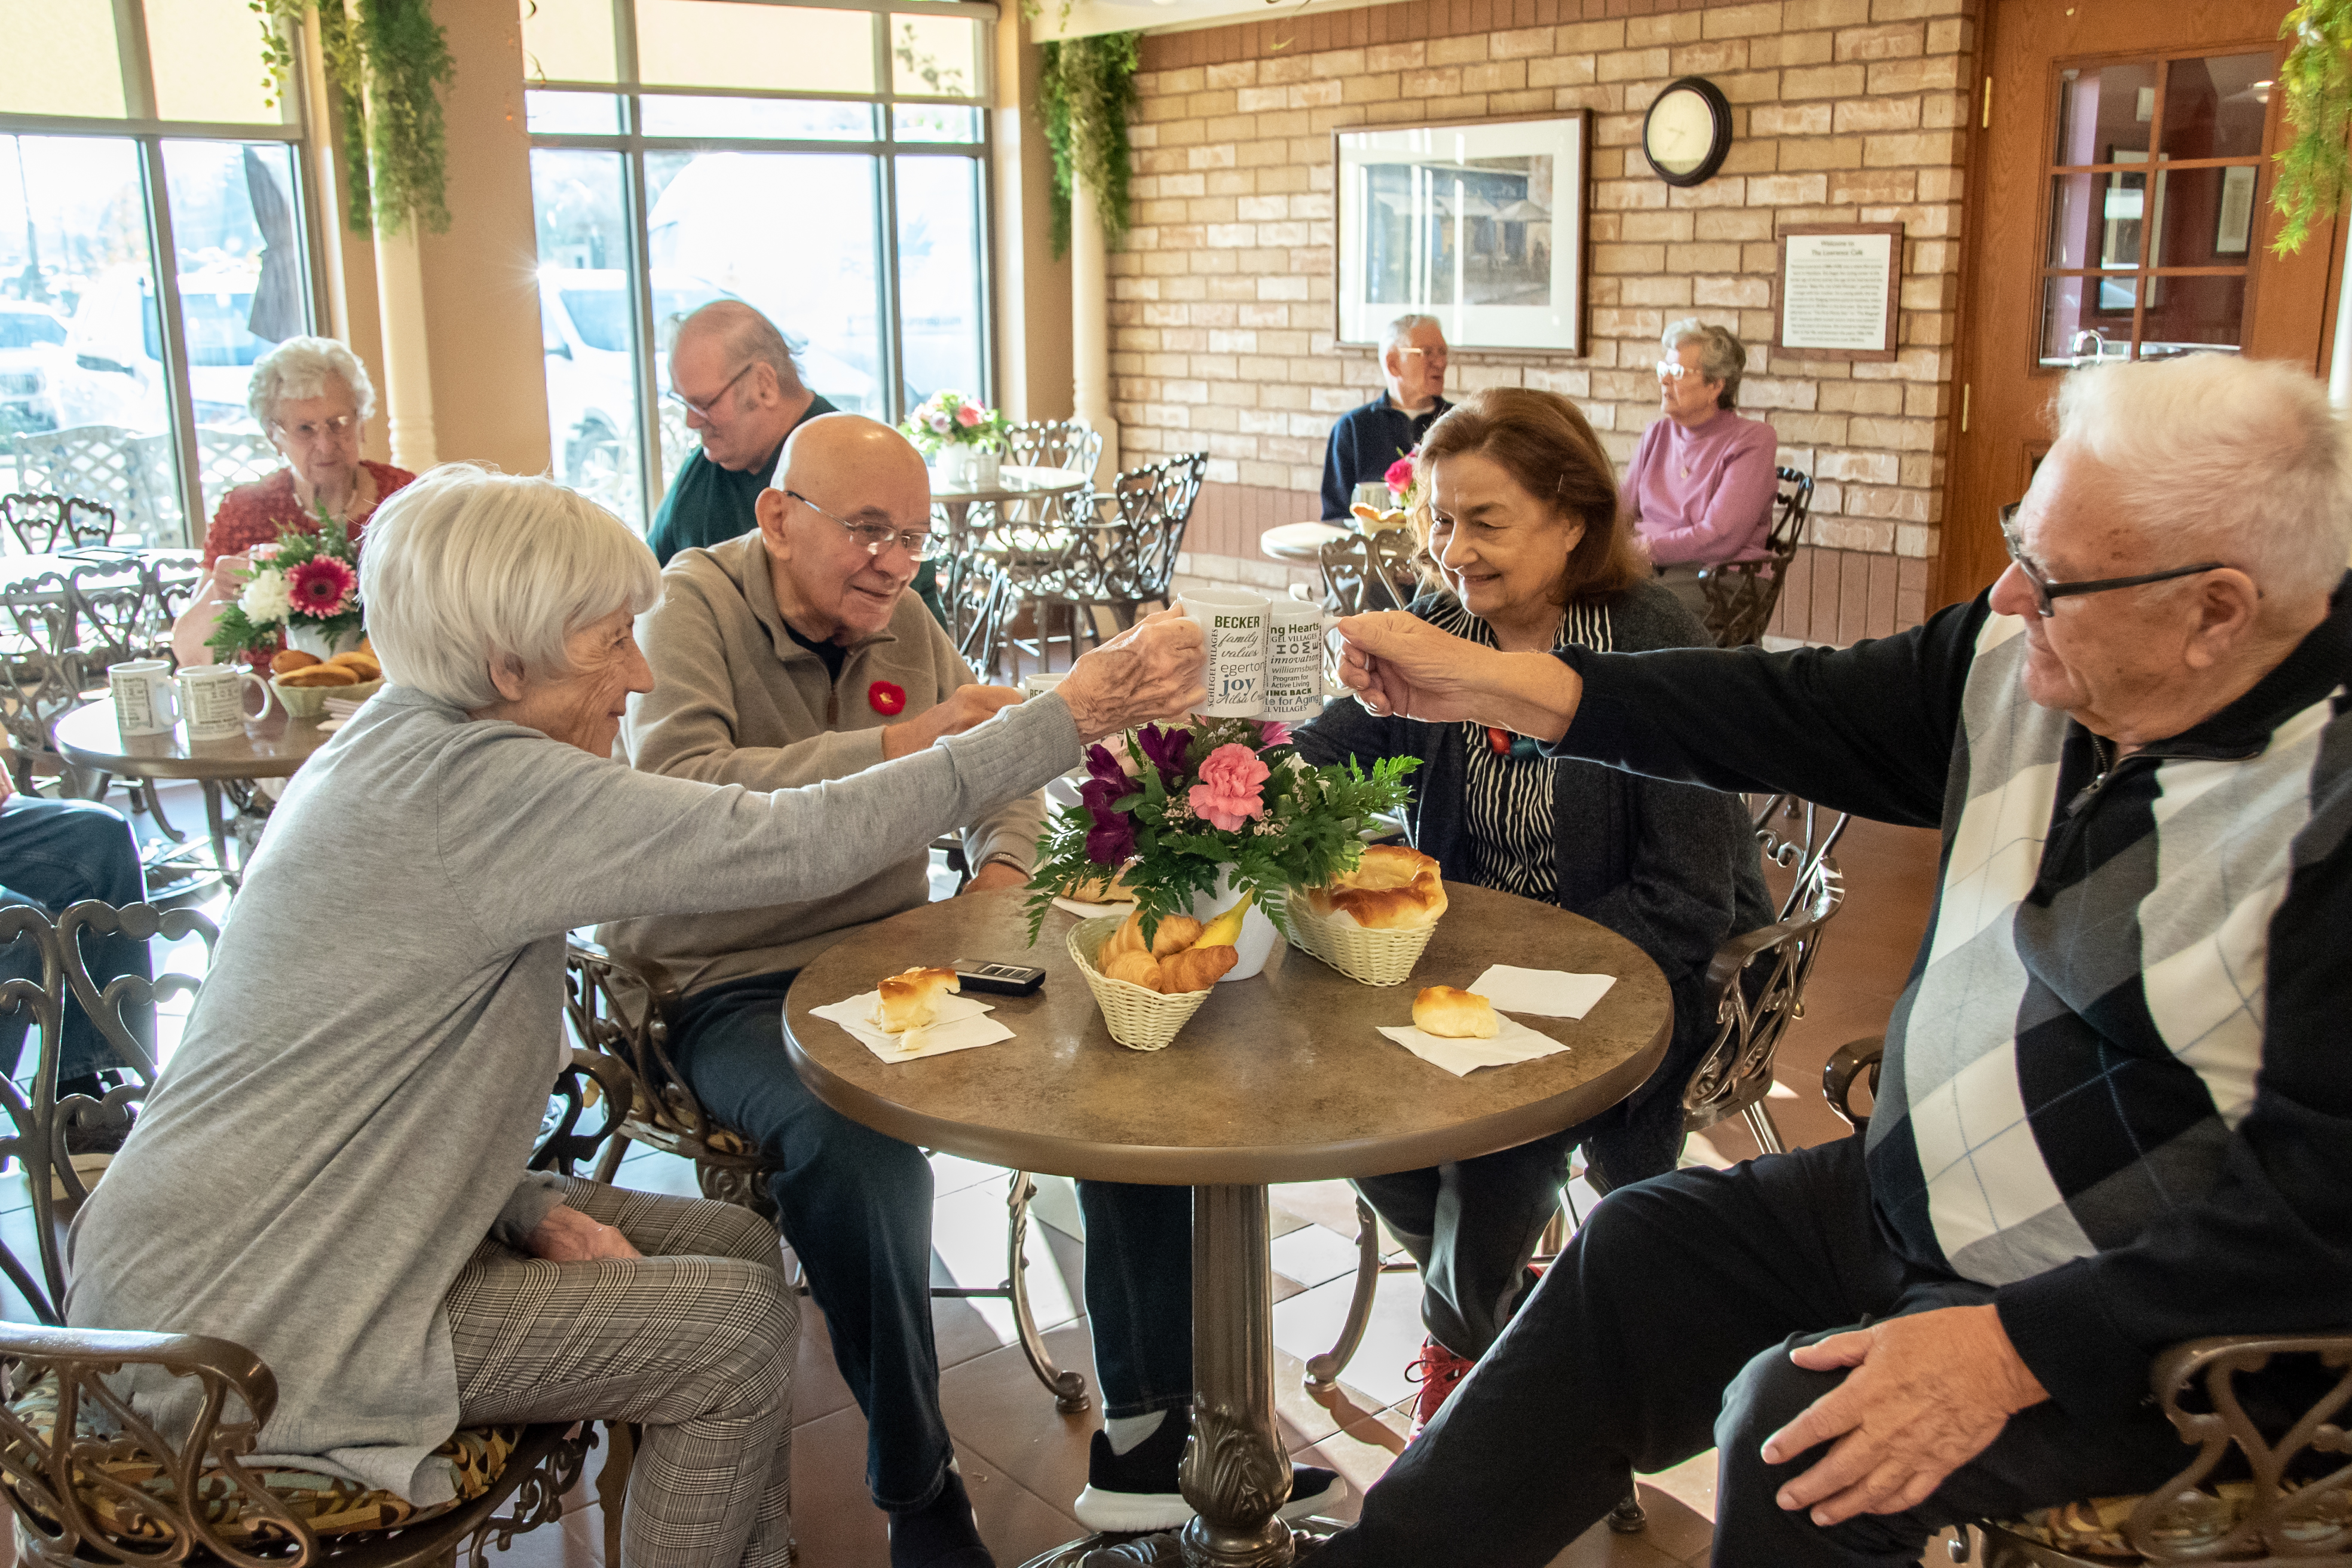 Group of residents toasting with their coffee mugs in the Village cafe.